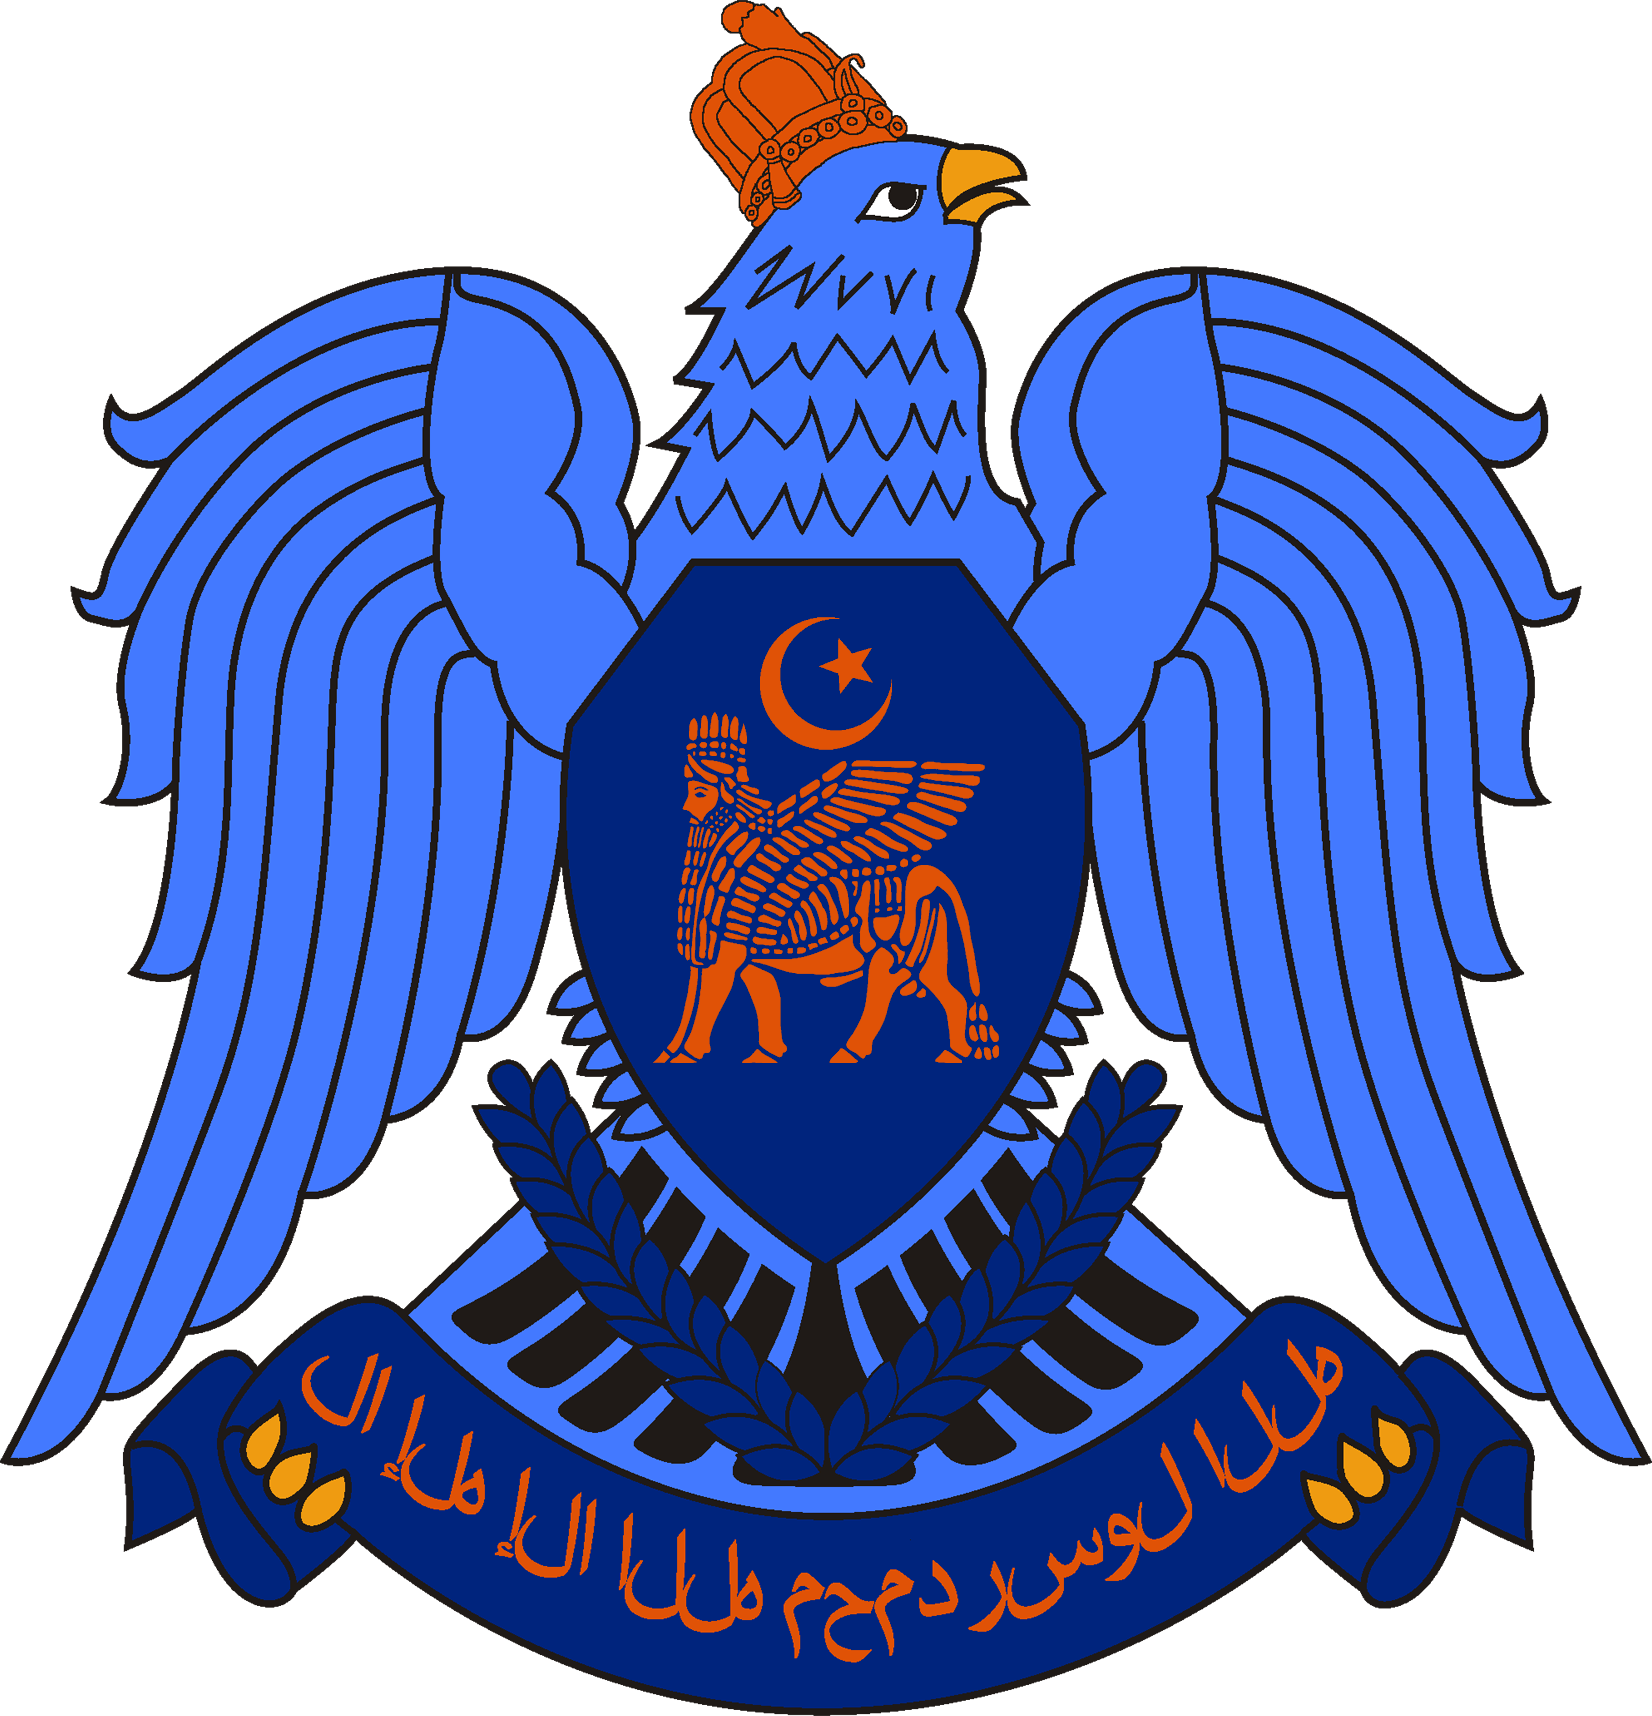 Wing clipart coat arm. Image of arms mesopotamian